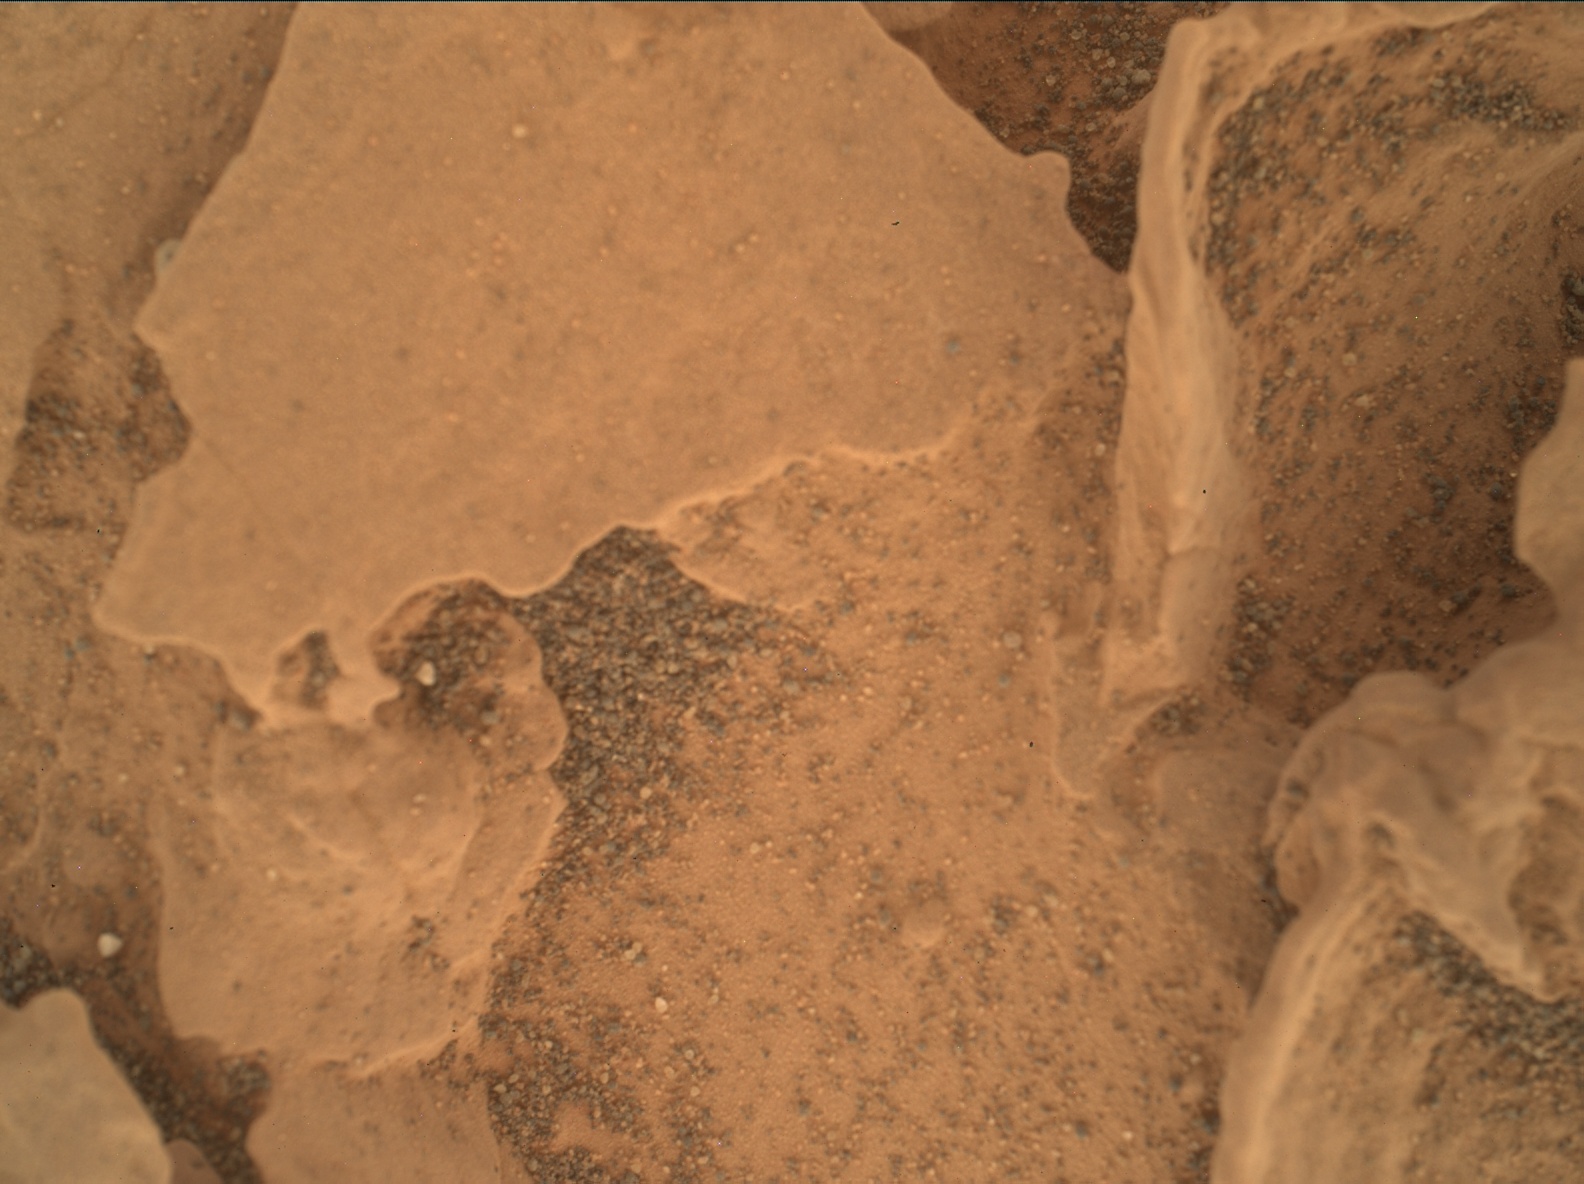 Nasa's Mars rover Curiosity acquired this image using its Mars Hand Lens Imager (MAHLI) on Sol 1800